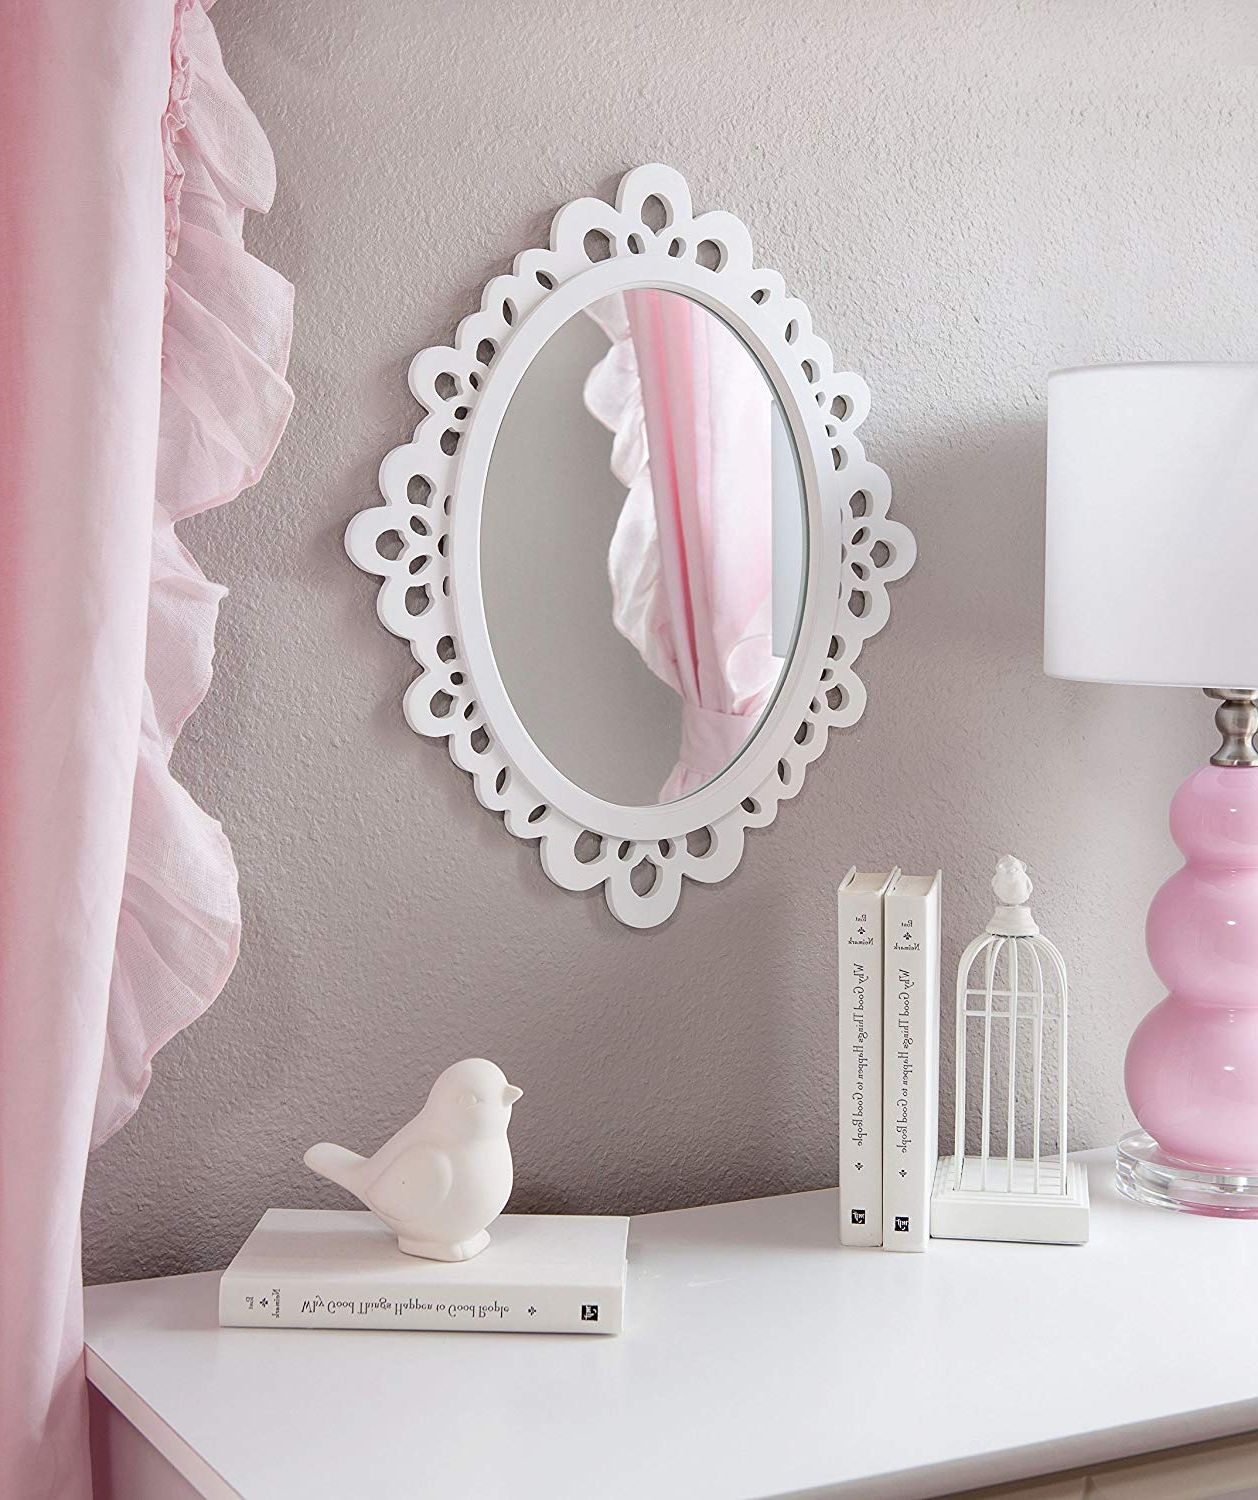 Favorite Oval Wall Mirror – Highly Decorative Wall Accessories – Use It For Bedroom  And Bathroom Wall, Or As A Princess Mirror For Girl's Princess Bedroom (View 3 of 20)